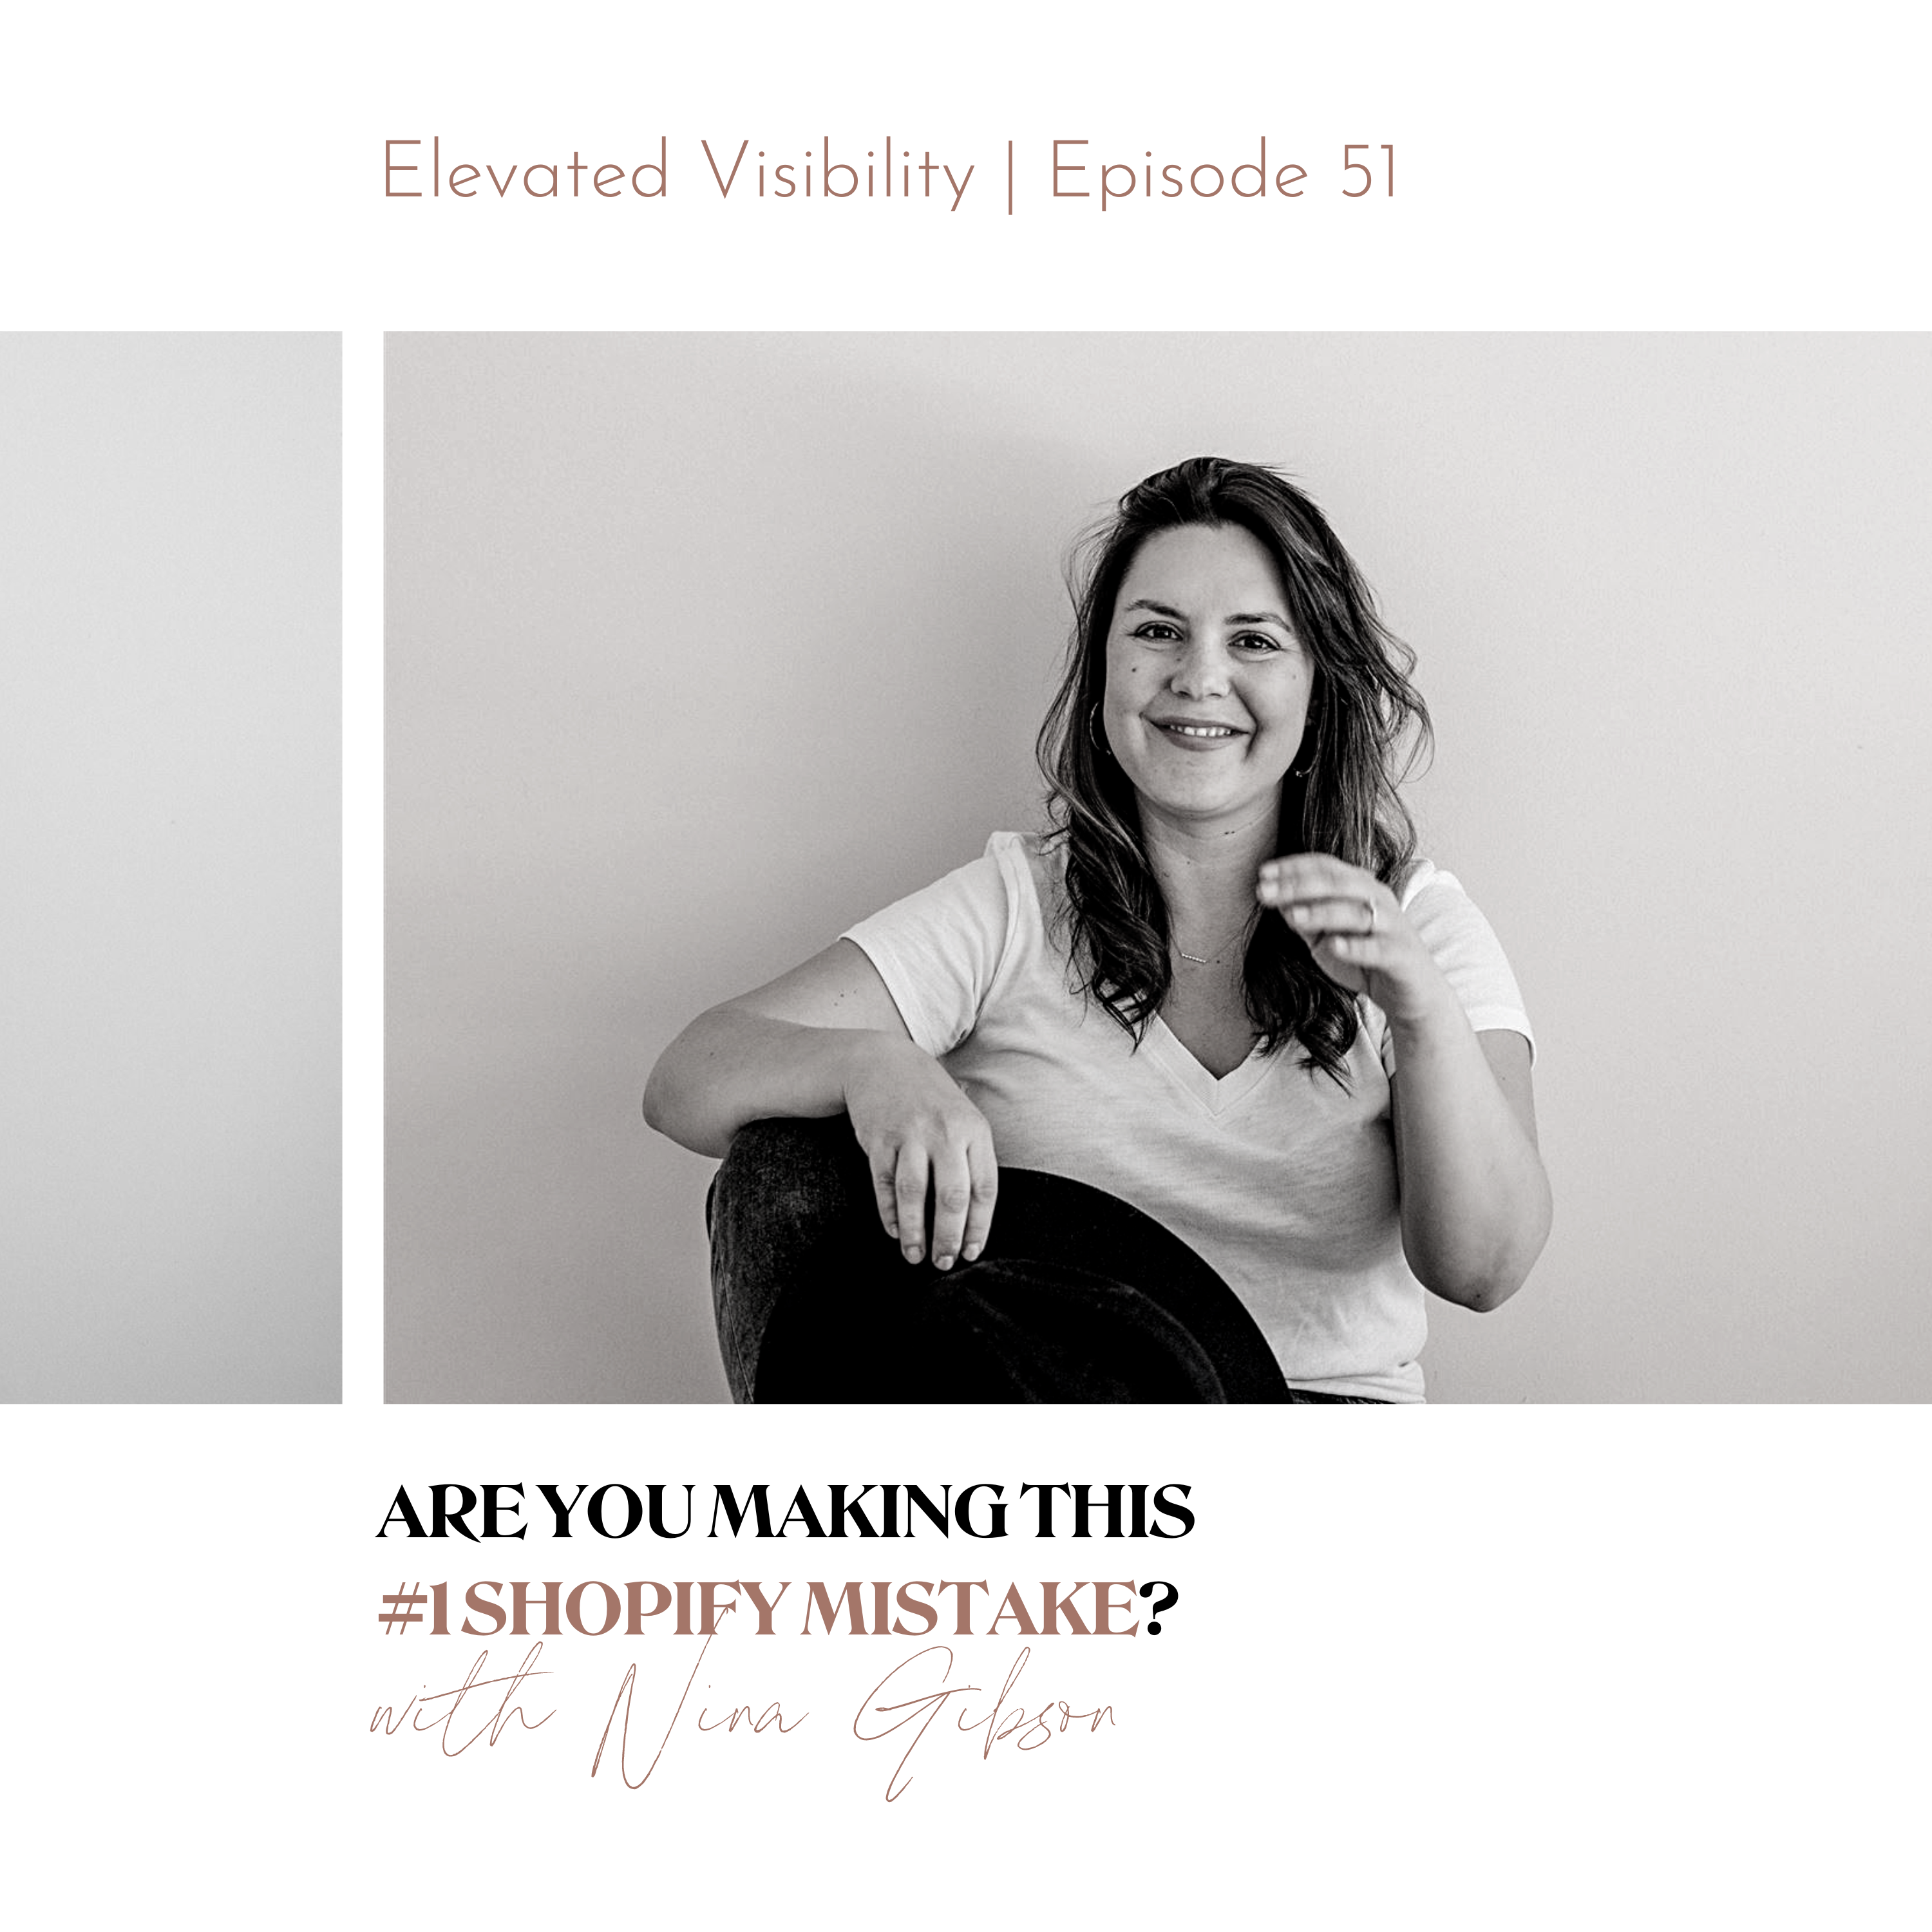 Elevated Visibil;ity podcast episode 51: Are You Making This #1 Shopify Mistake? featured image